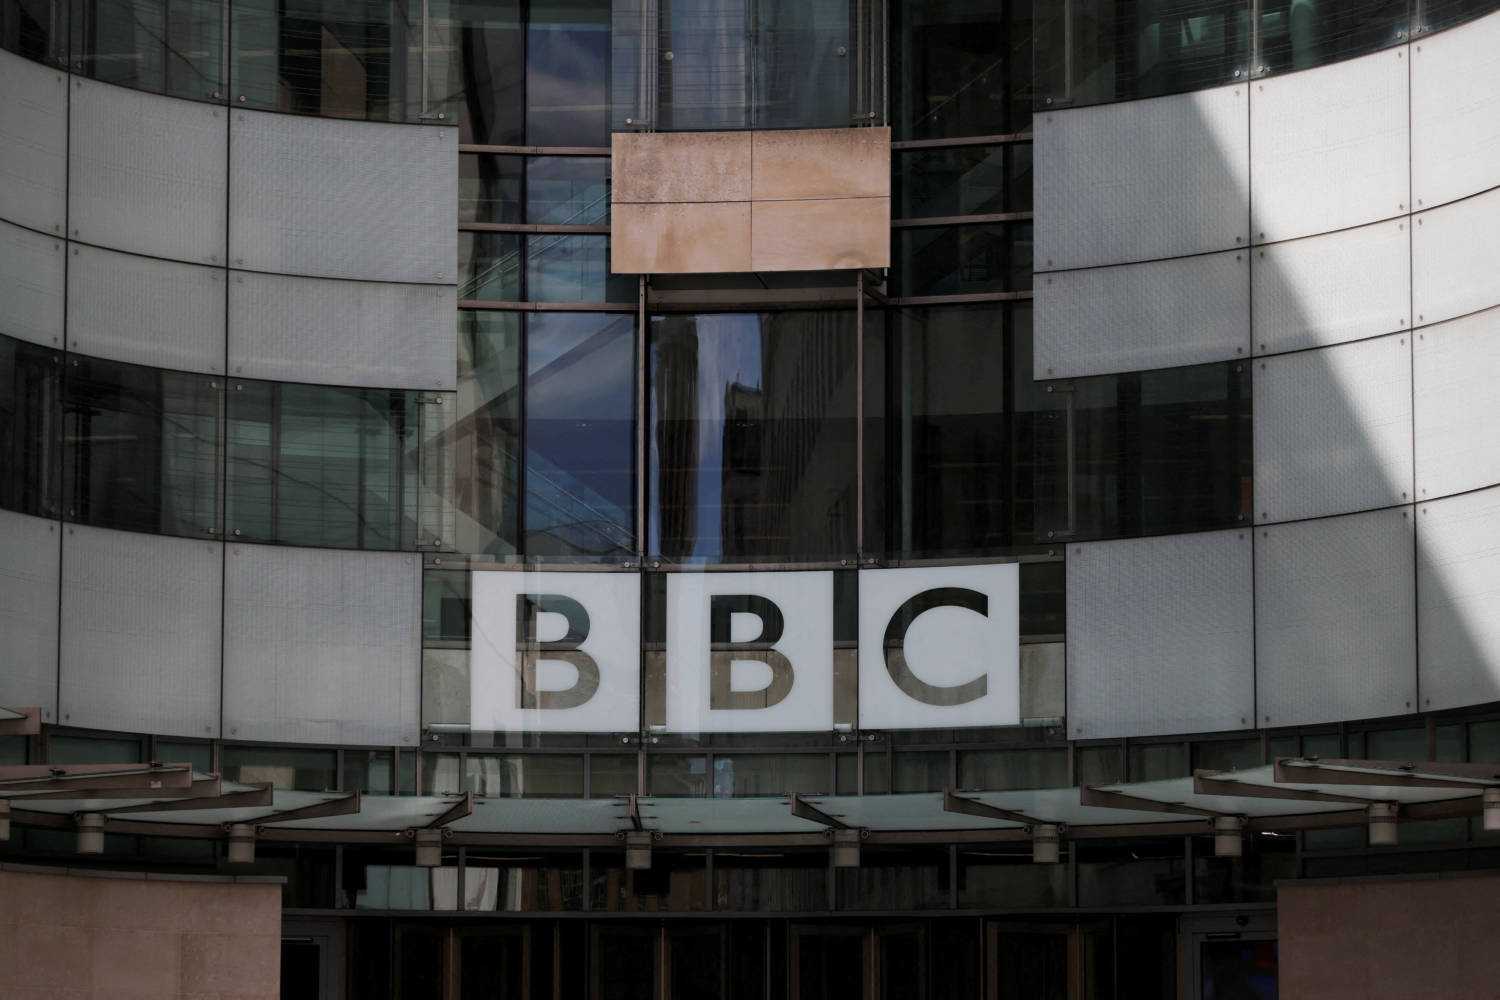 File Photo: The Bbc Logo Is Displayed Above The Entrance To The Bbc Headquarters In London